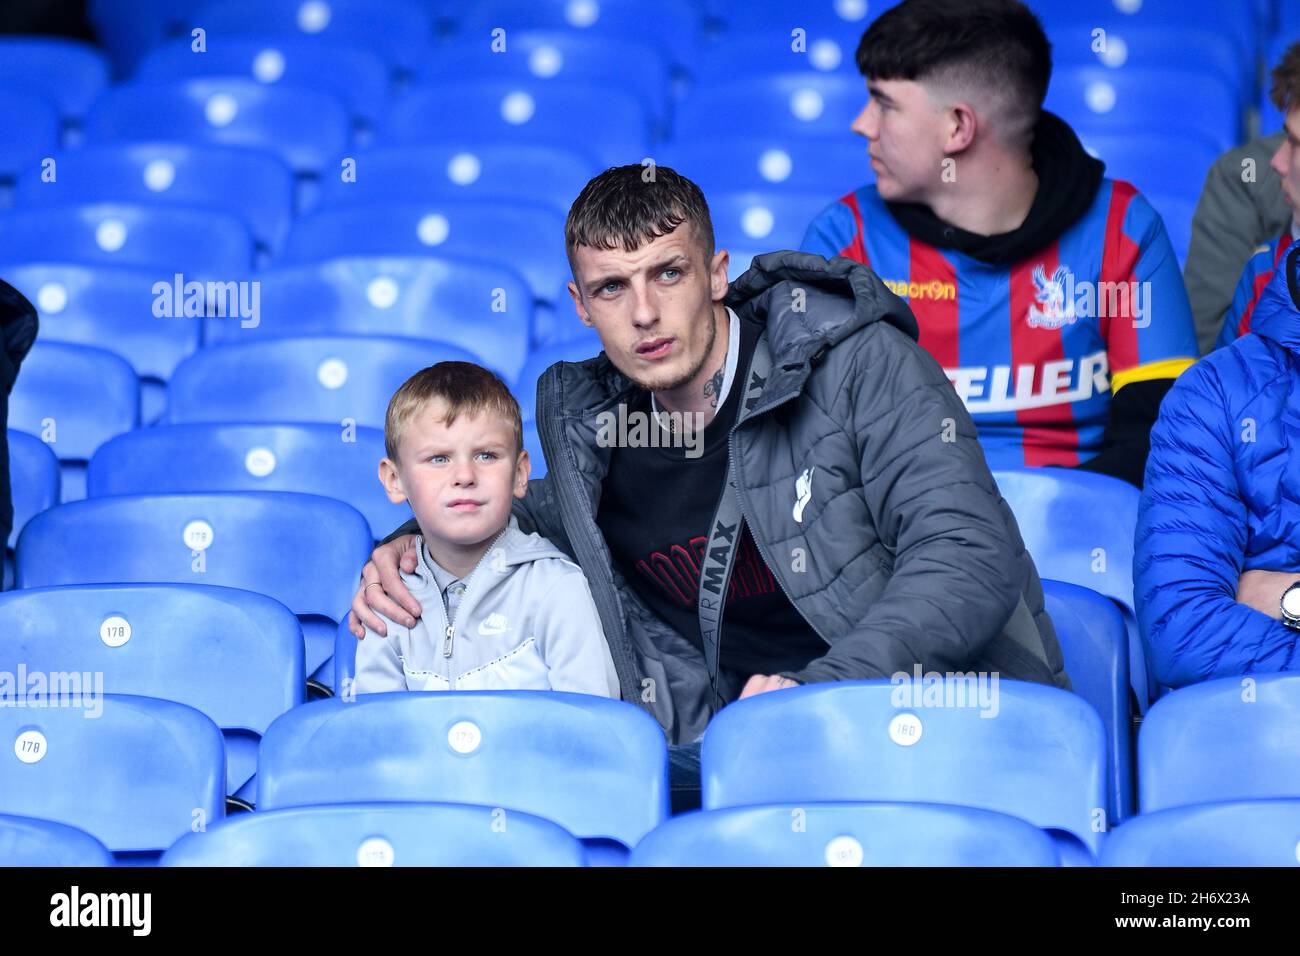 LONDON, ENGLAND - OCTOBER 3, 2021: Crystal Palace fans pictured ahead of the 2021-22 Premier League matchweek 7 game between Crystal Palace FC and Leicester CIty FC at Selhurst Park. Copyright: Cosmin Iftode/Picstaff Stock Photo